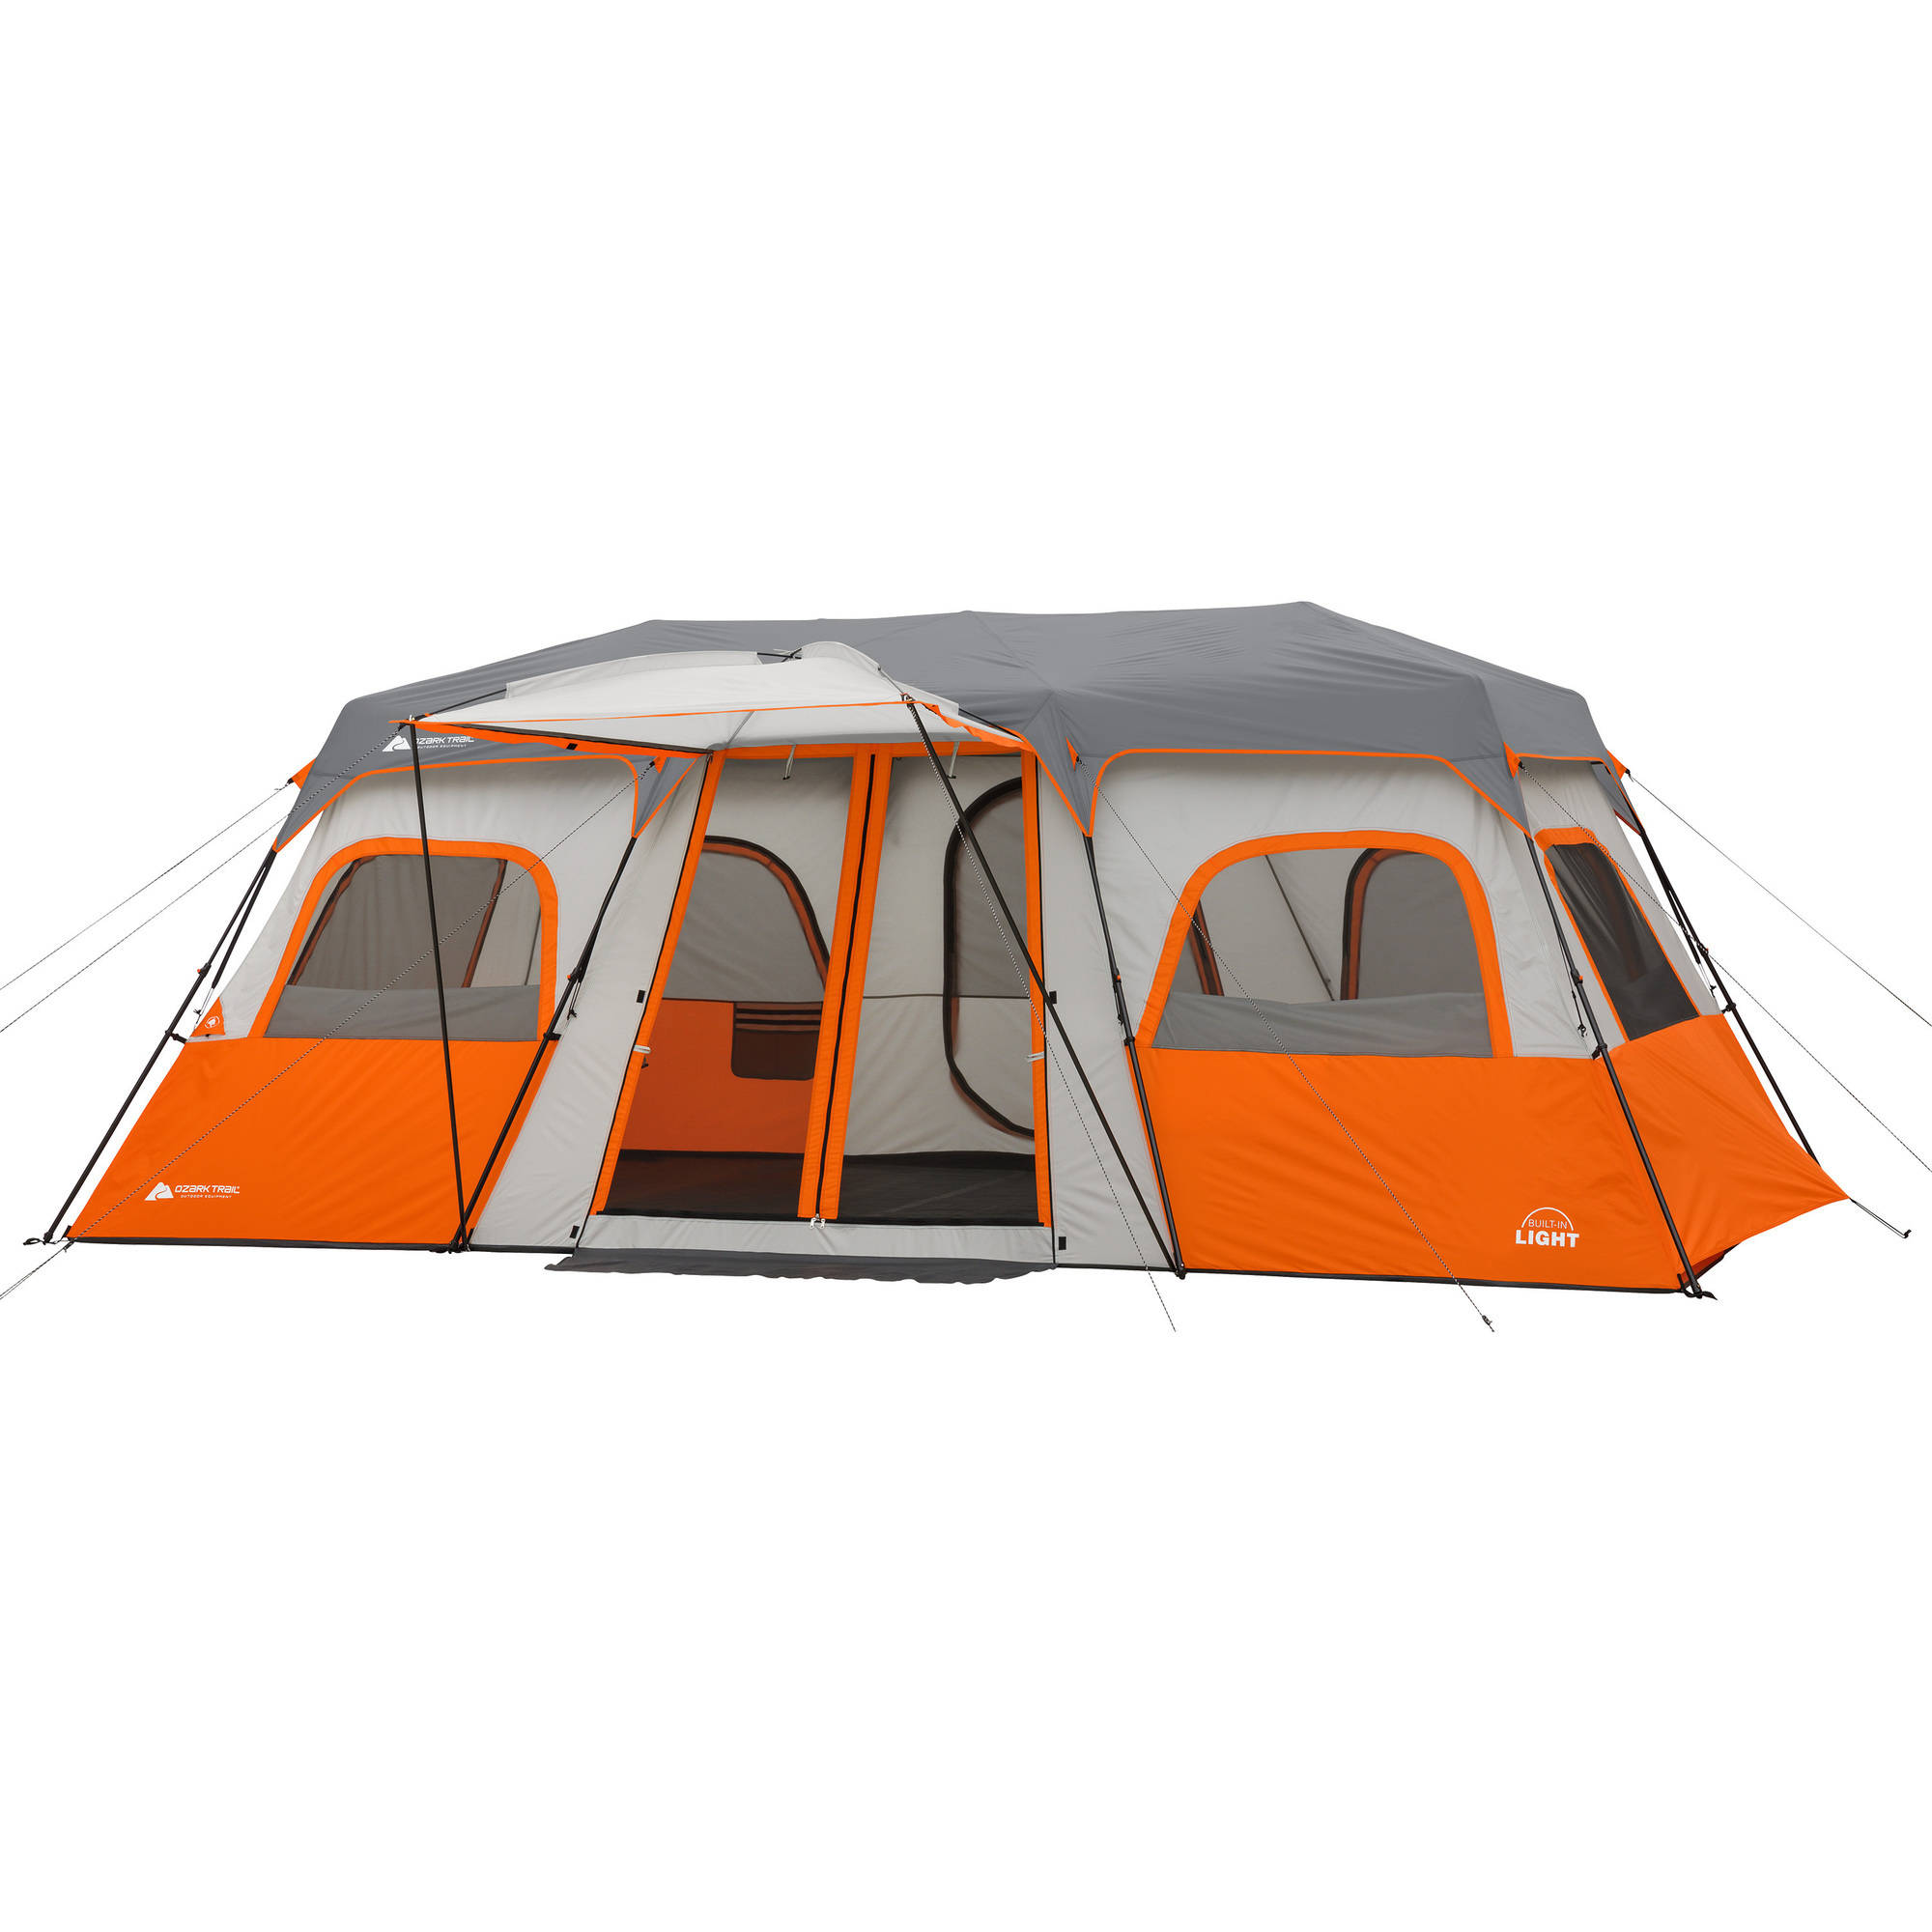 Ozark Trail 12 Person Instant Cabin Tent with Integrated LED Lights, 3 Rooms, 47.87 lbs - image 1 of 17